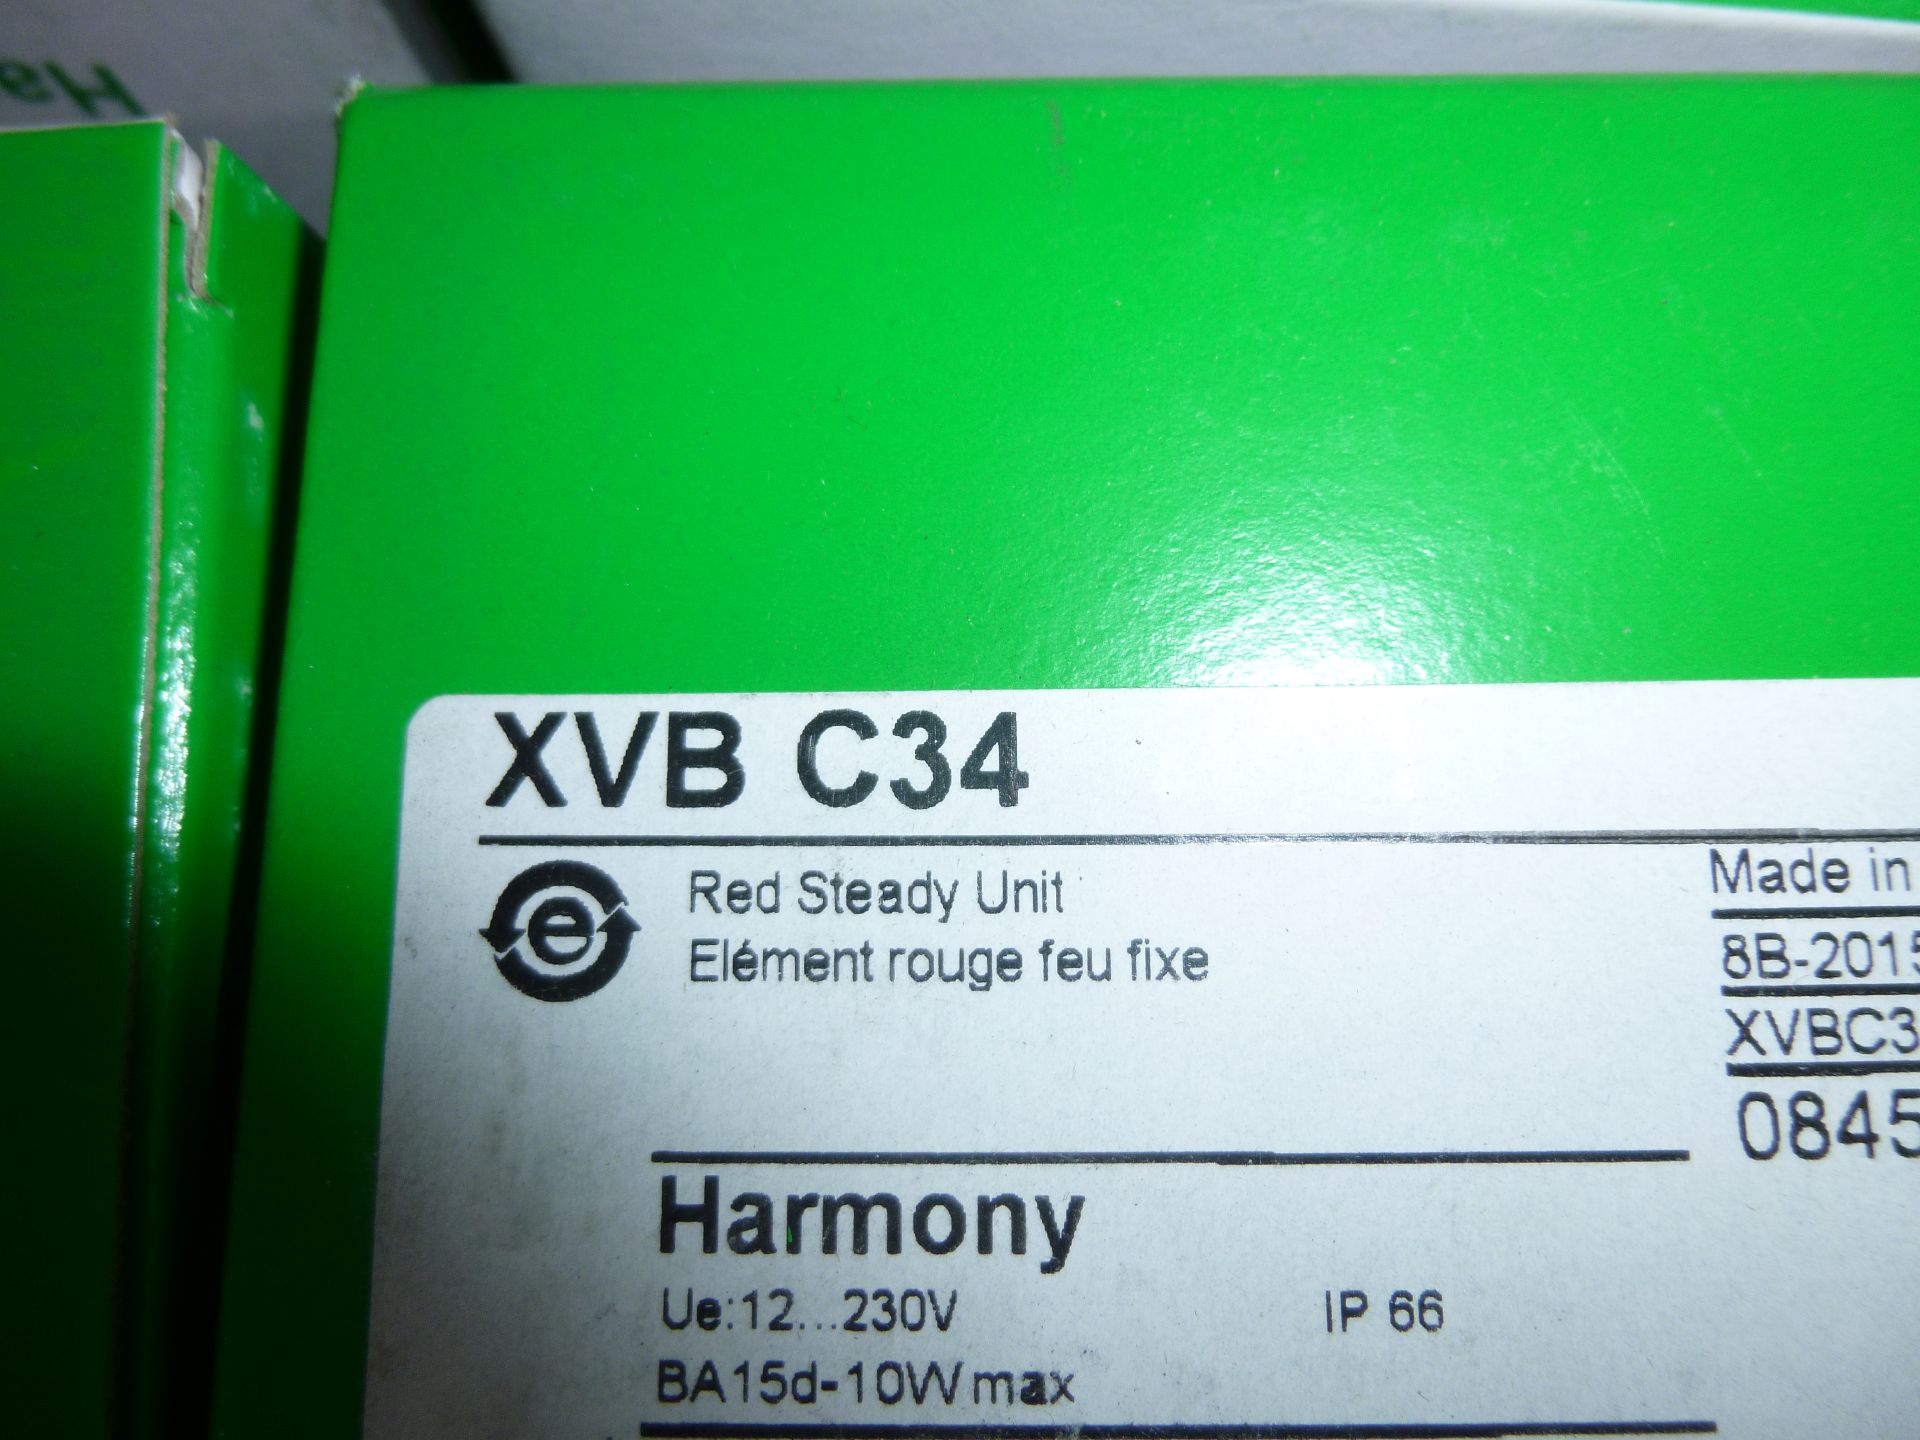 Qty 4 Schneider Electric model XVB-C34, new in boxes, as always with Brolyn LLC auctions, all lots - Image 2 of 2